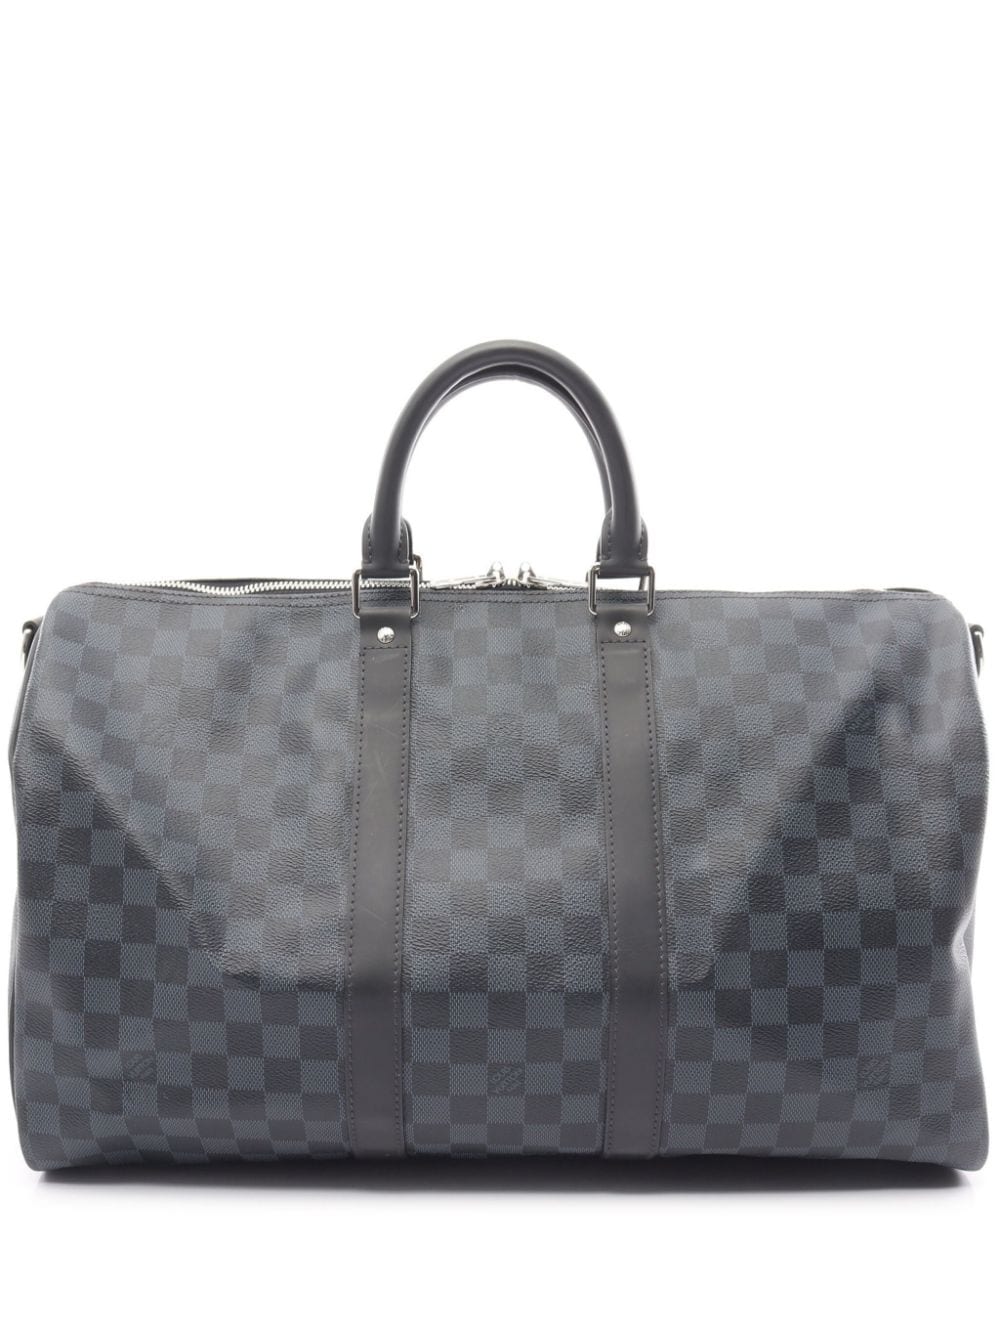 Pre-owned Louis Vuitton 2016 Keepall 45 Two-way Travel Bag In Black